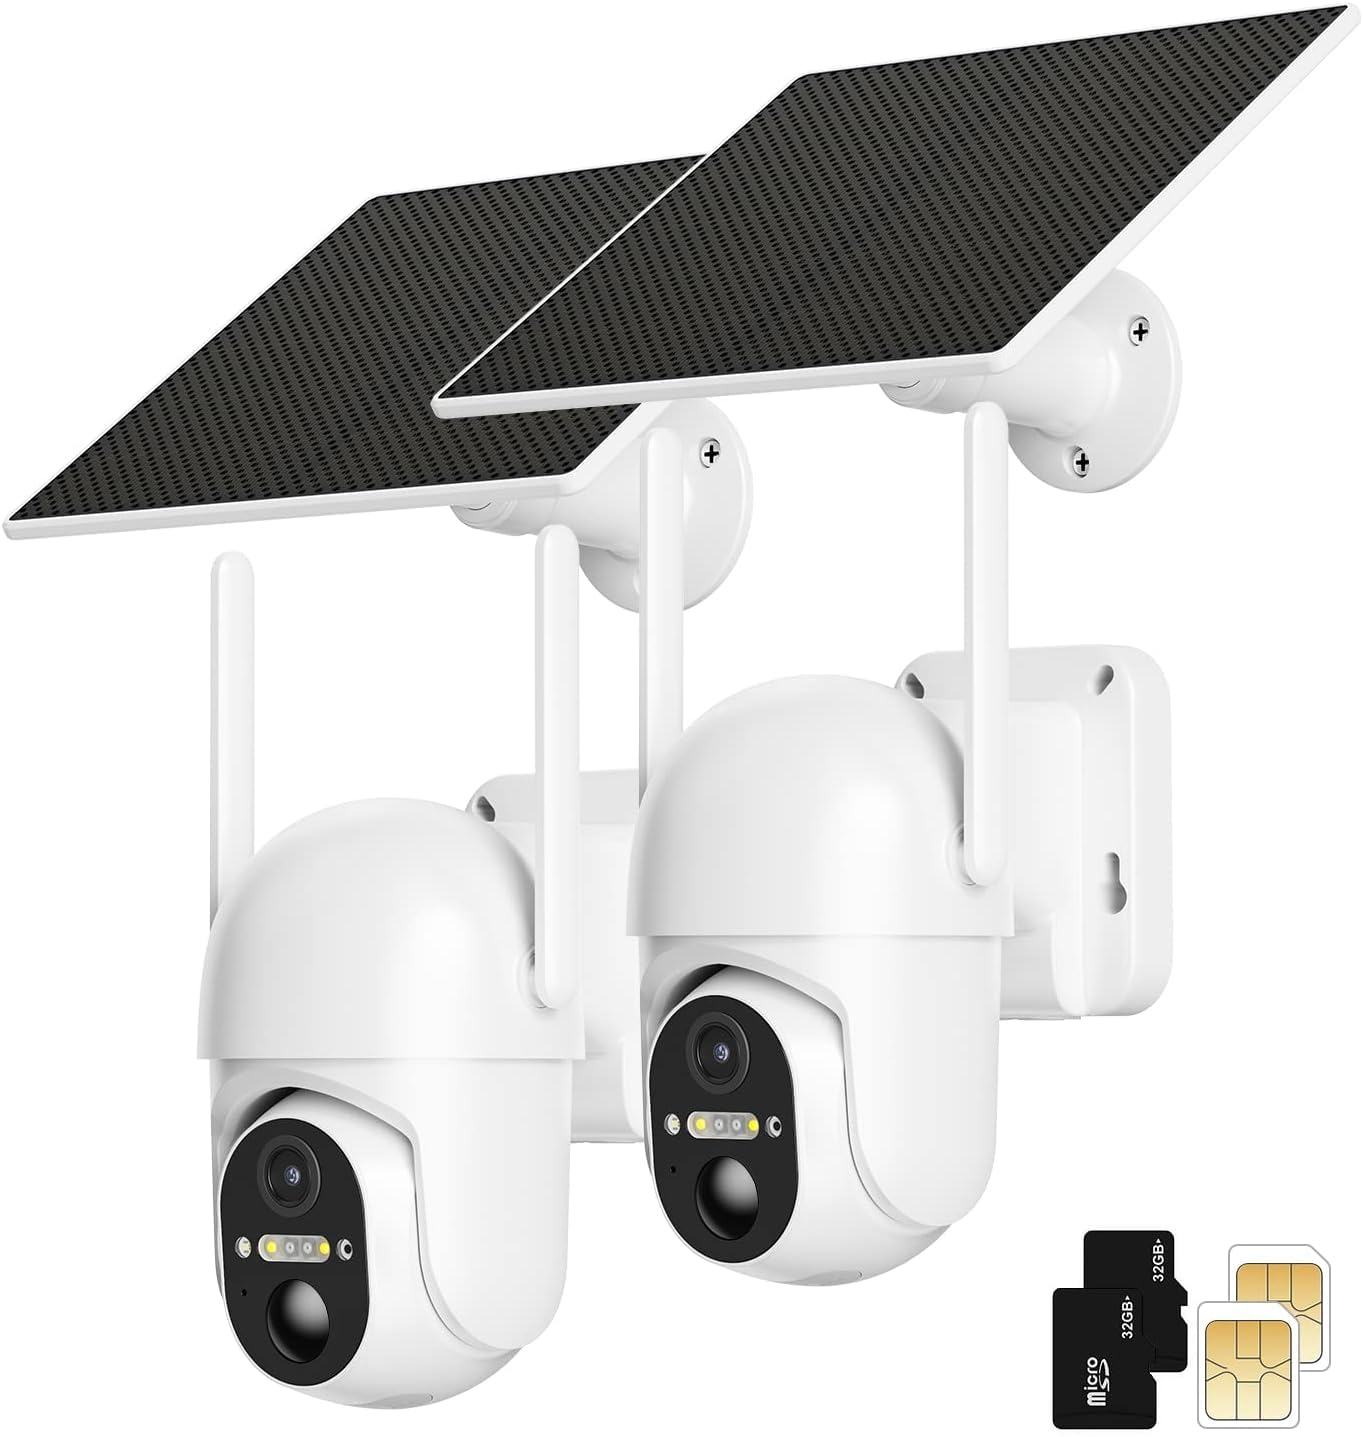 Ebitcam 4G LTE Cellular Security Cameras Include SD&SIM Card, Solar Powered Camera No WiFi Needed, 2K Live Video, 360° View, Color Night Vision, Motion&Siren Alert, Remote Access&Playback on Phone